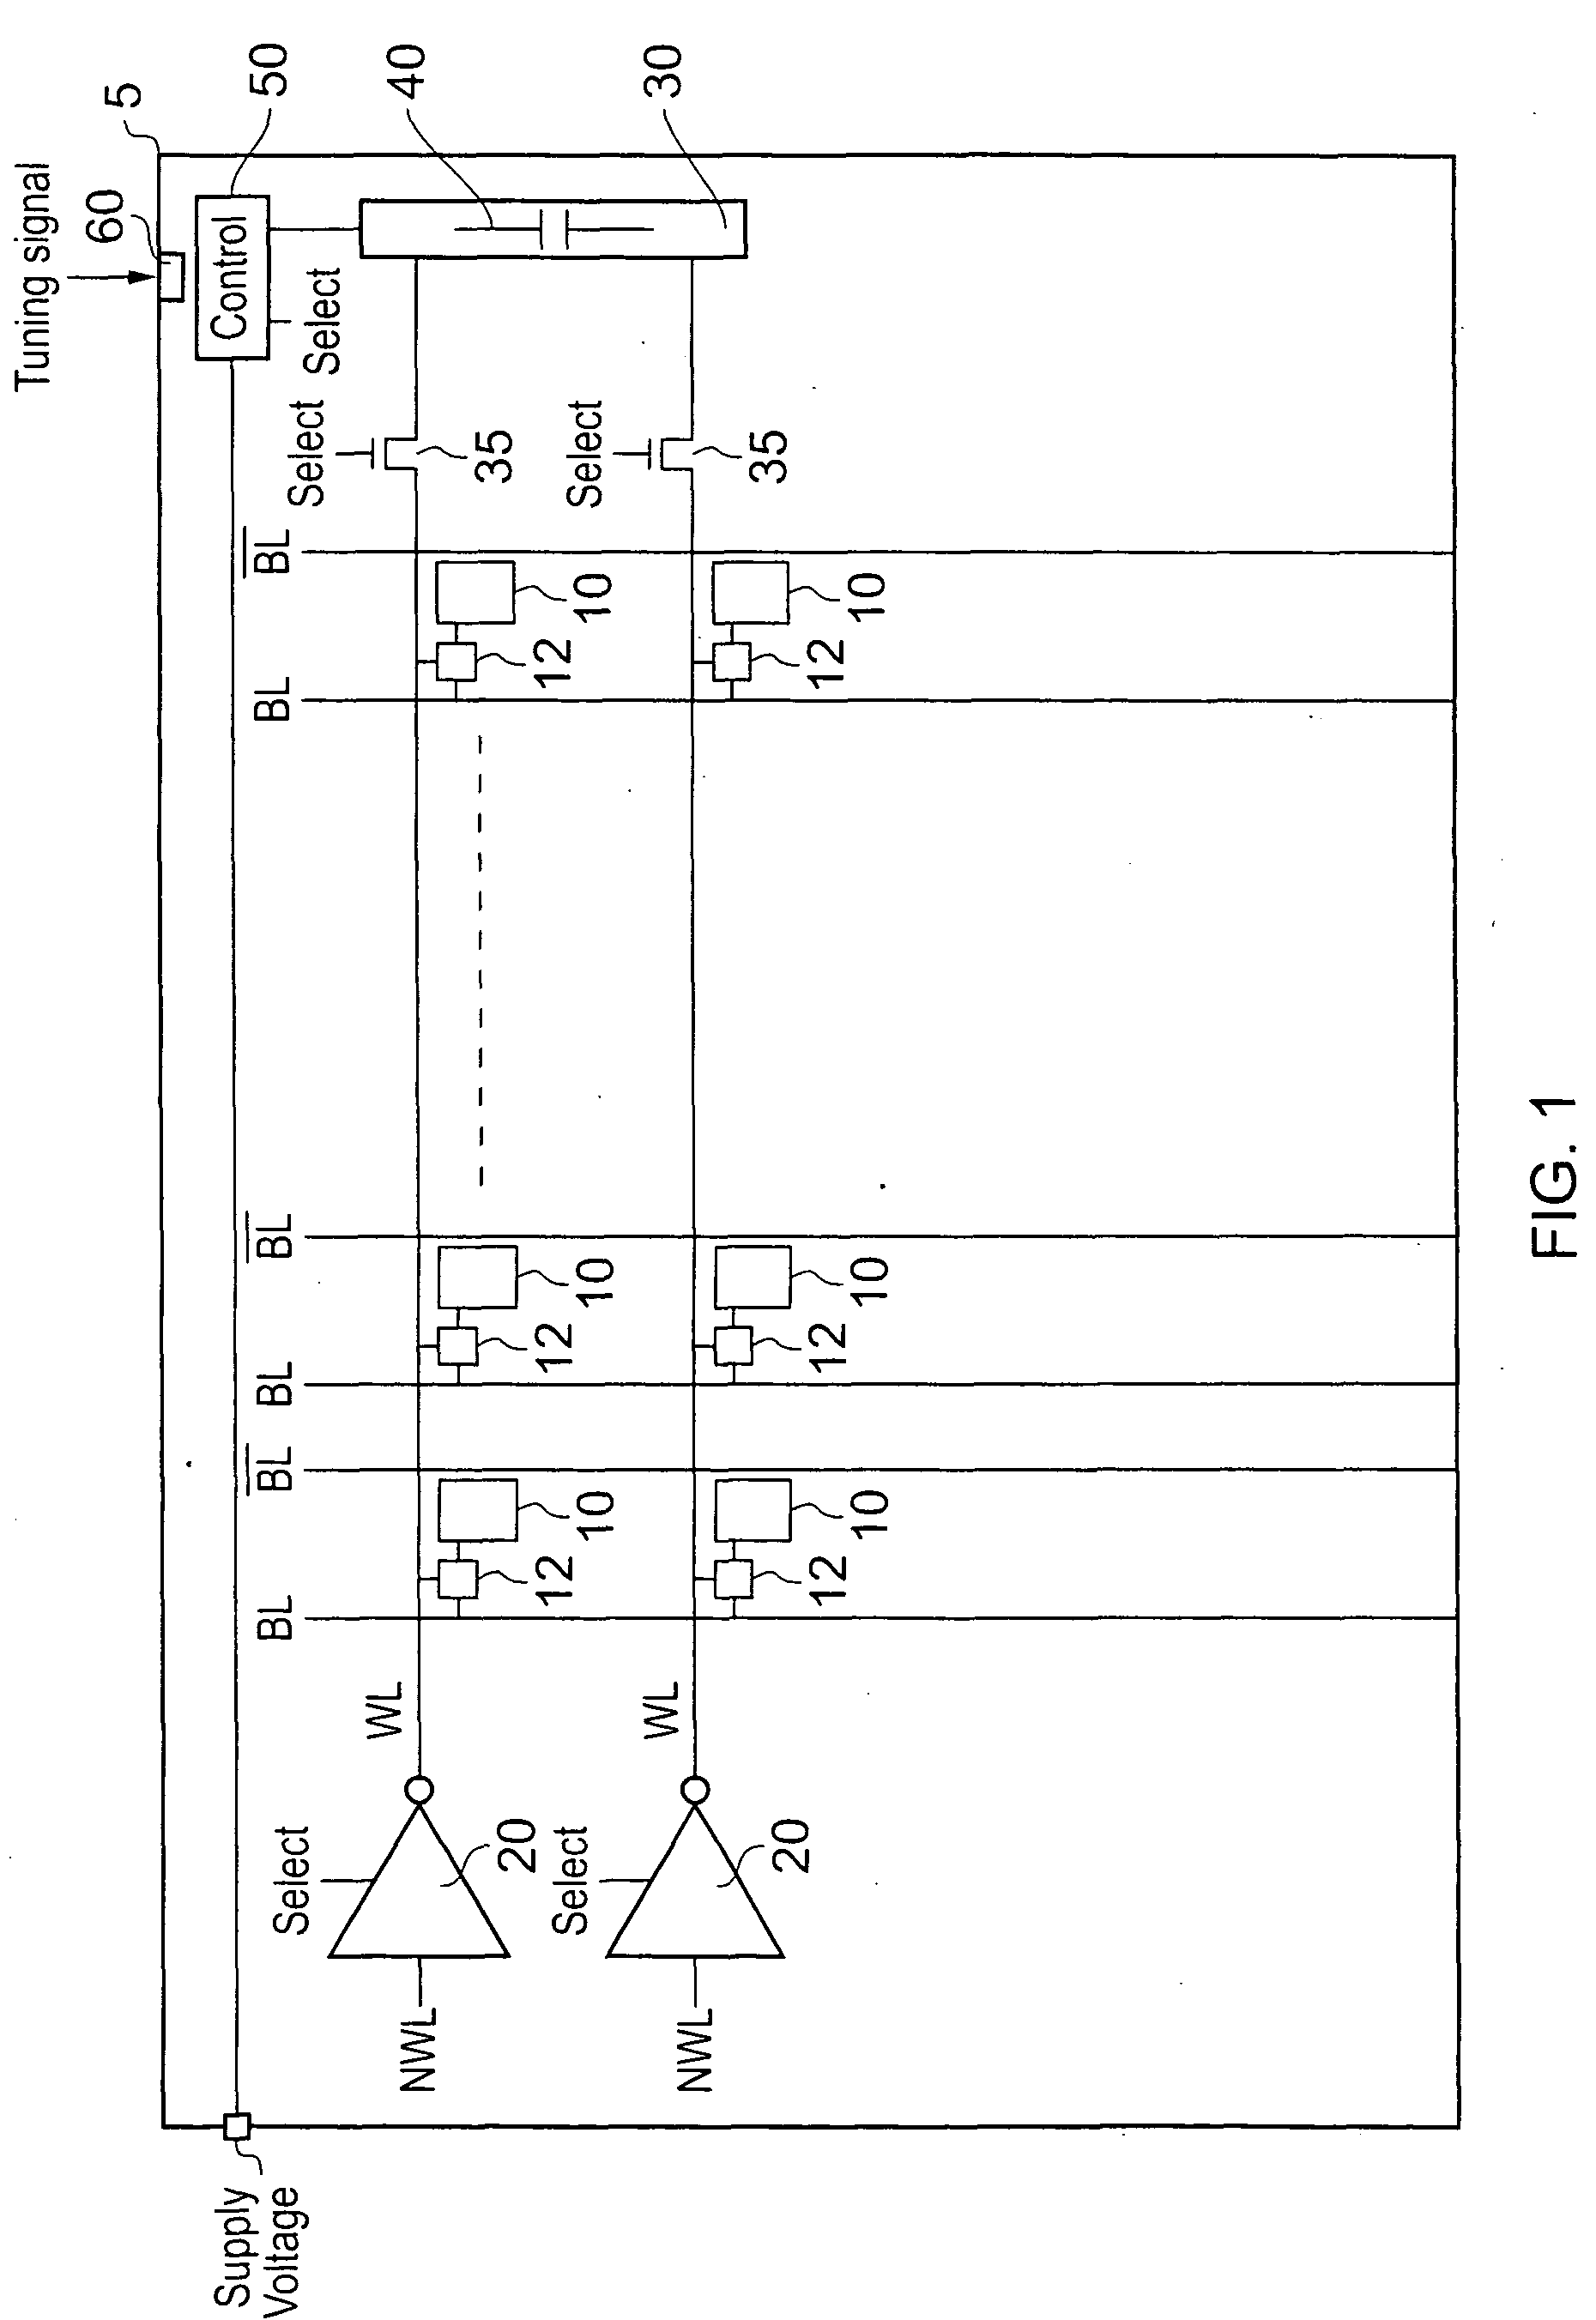 Controlling voltage levels applied to access devices when accessing storage cells in a memory